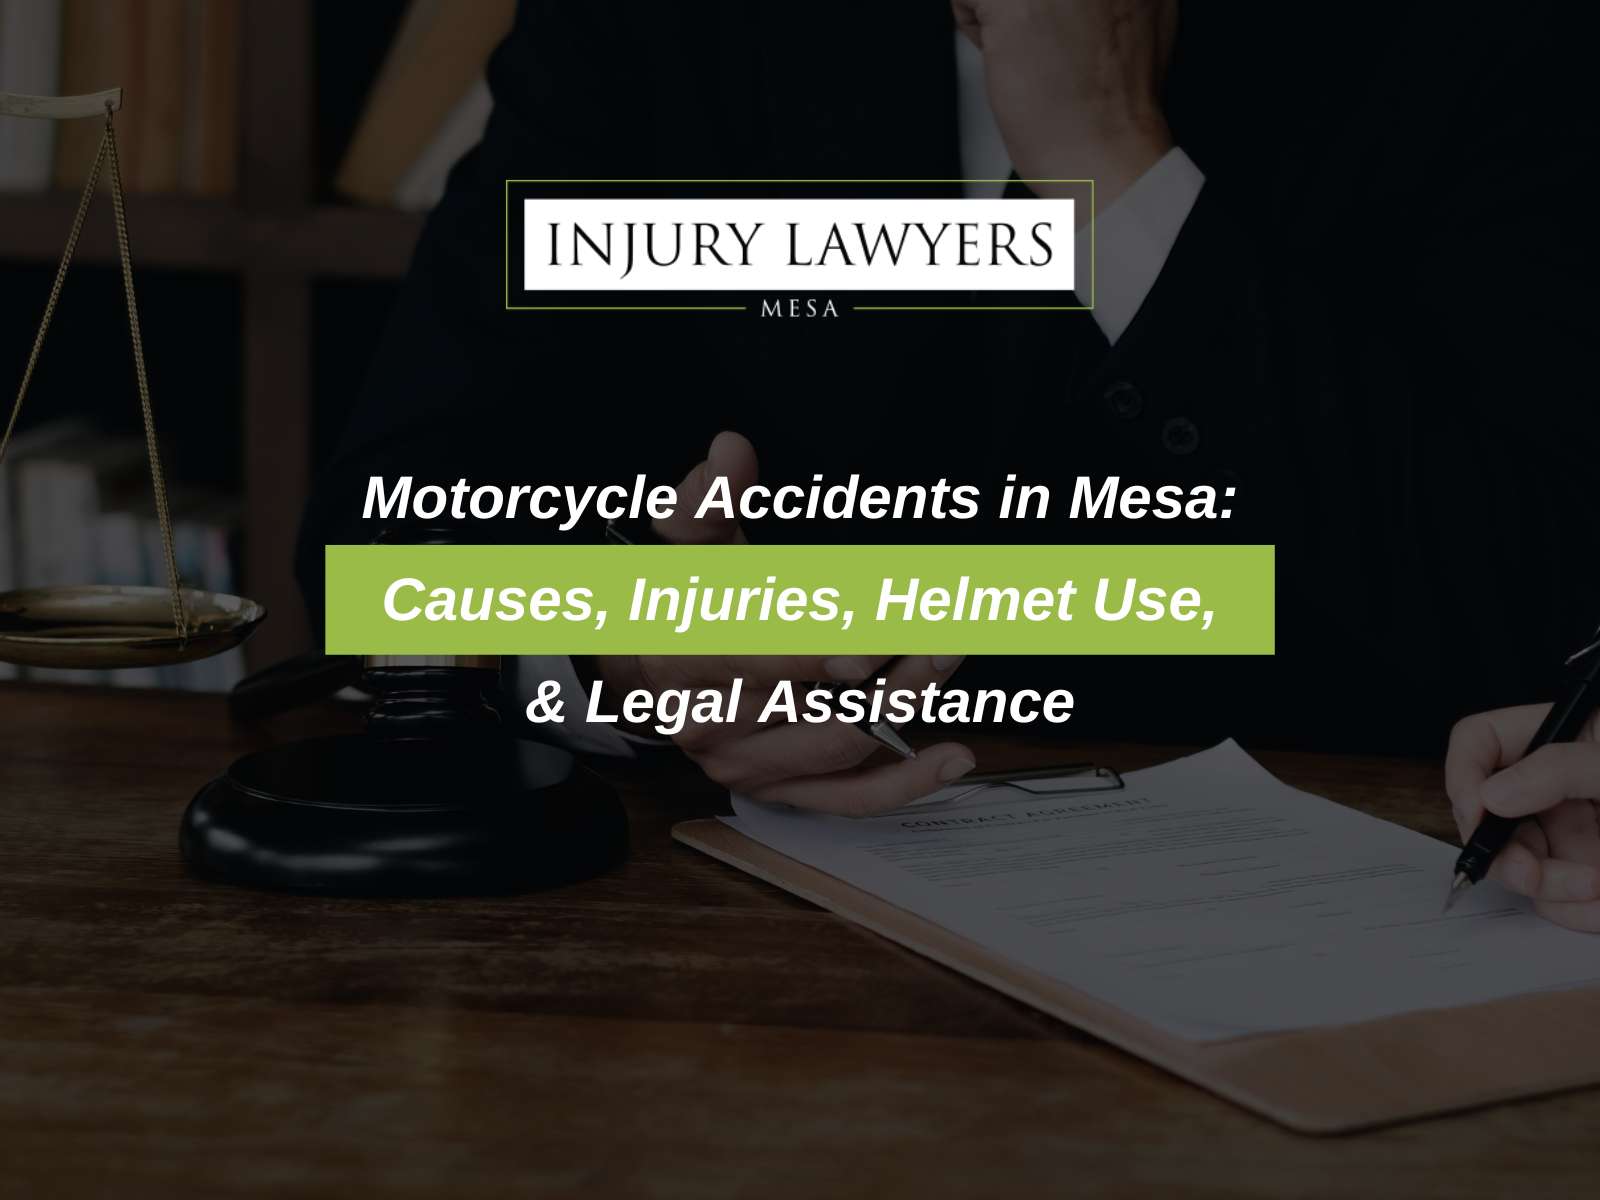 Motorcycle Accidents in Mesa, Arizona: Causes, Injuries, Helmet Use, & Legal Assistance